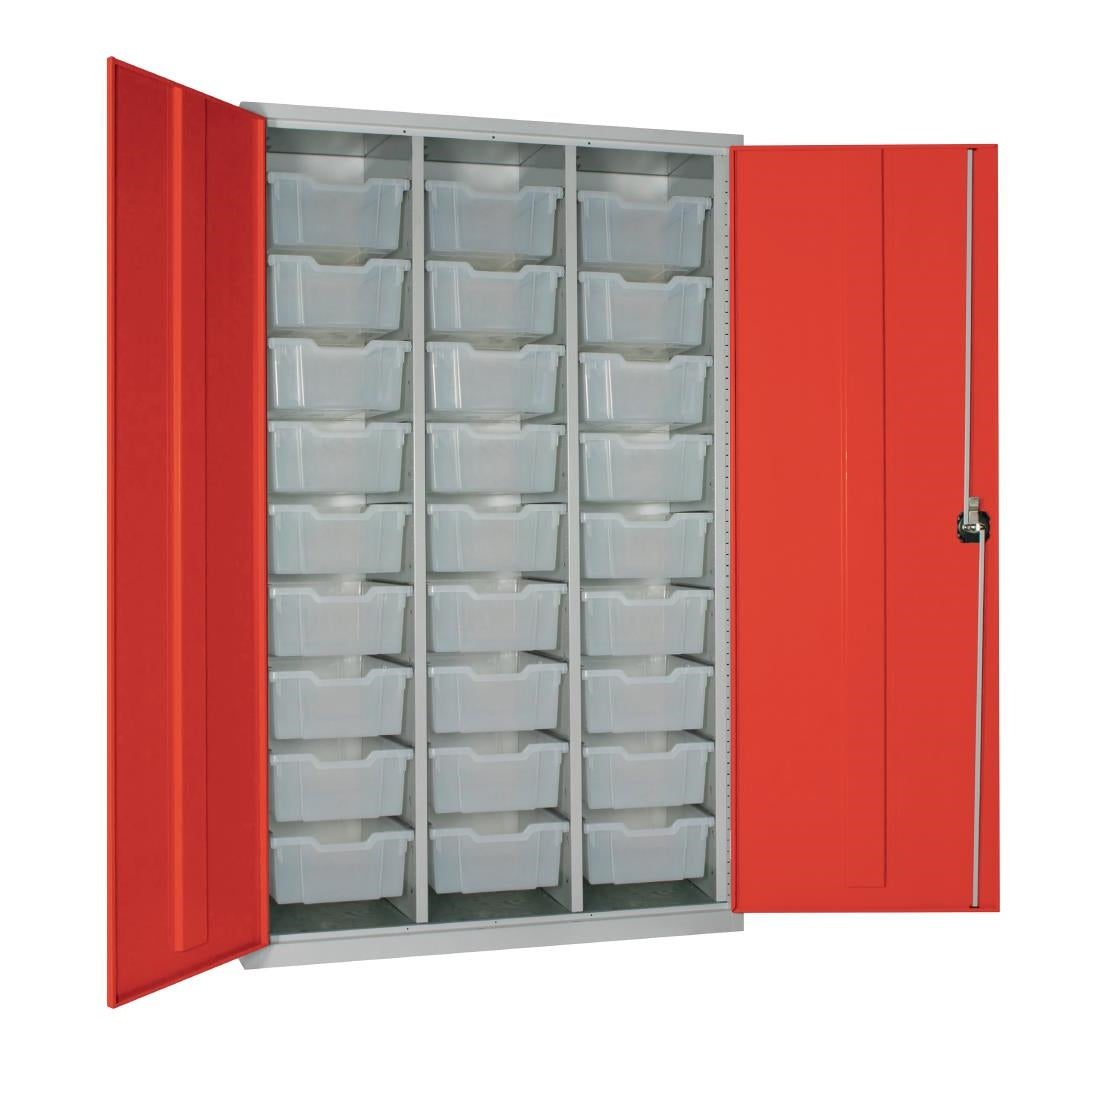 27 Tray High-Capacity Storage Cupboard - Red with Transparent Trays